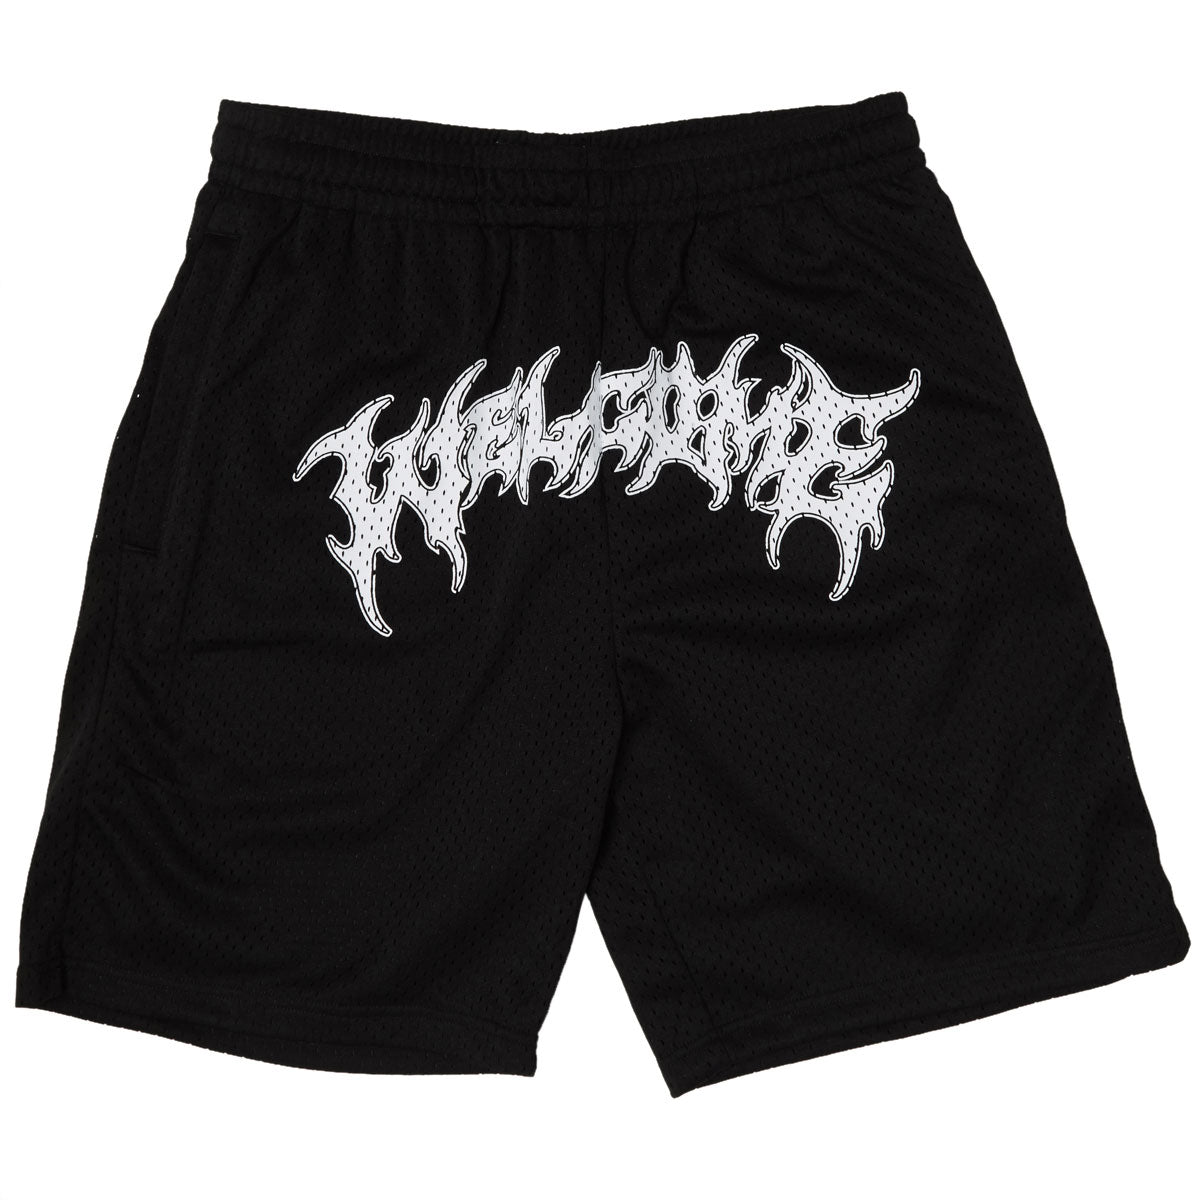 Welcome Barb Mesh Shorts - Black image 1